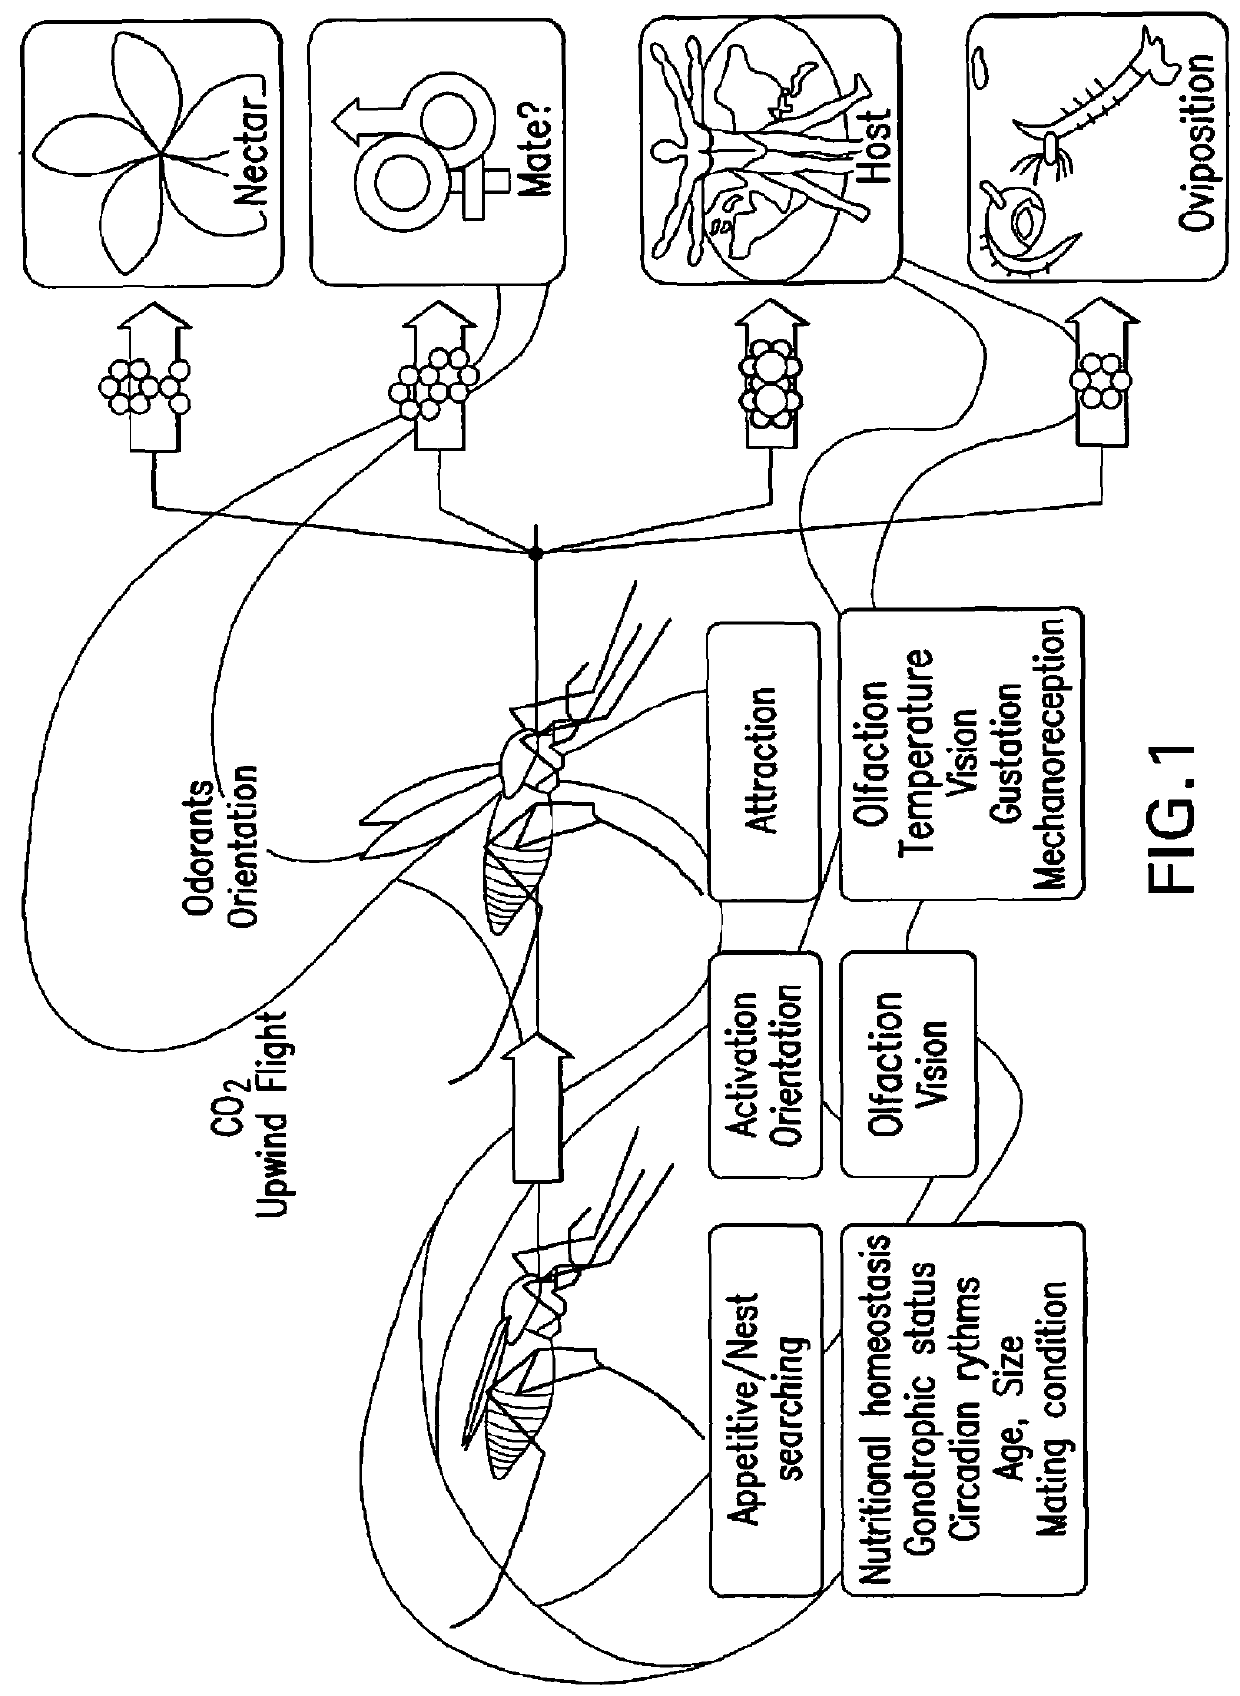 Composition for inhibition of insect host sensing